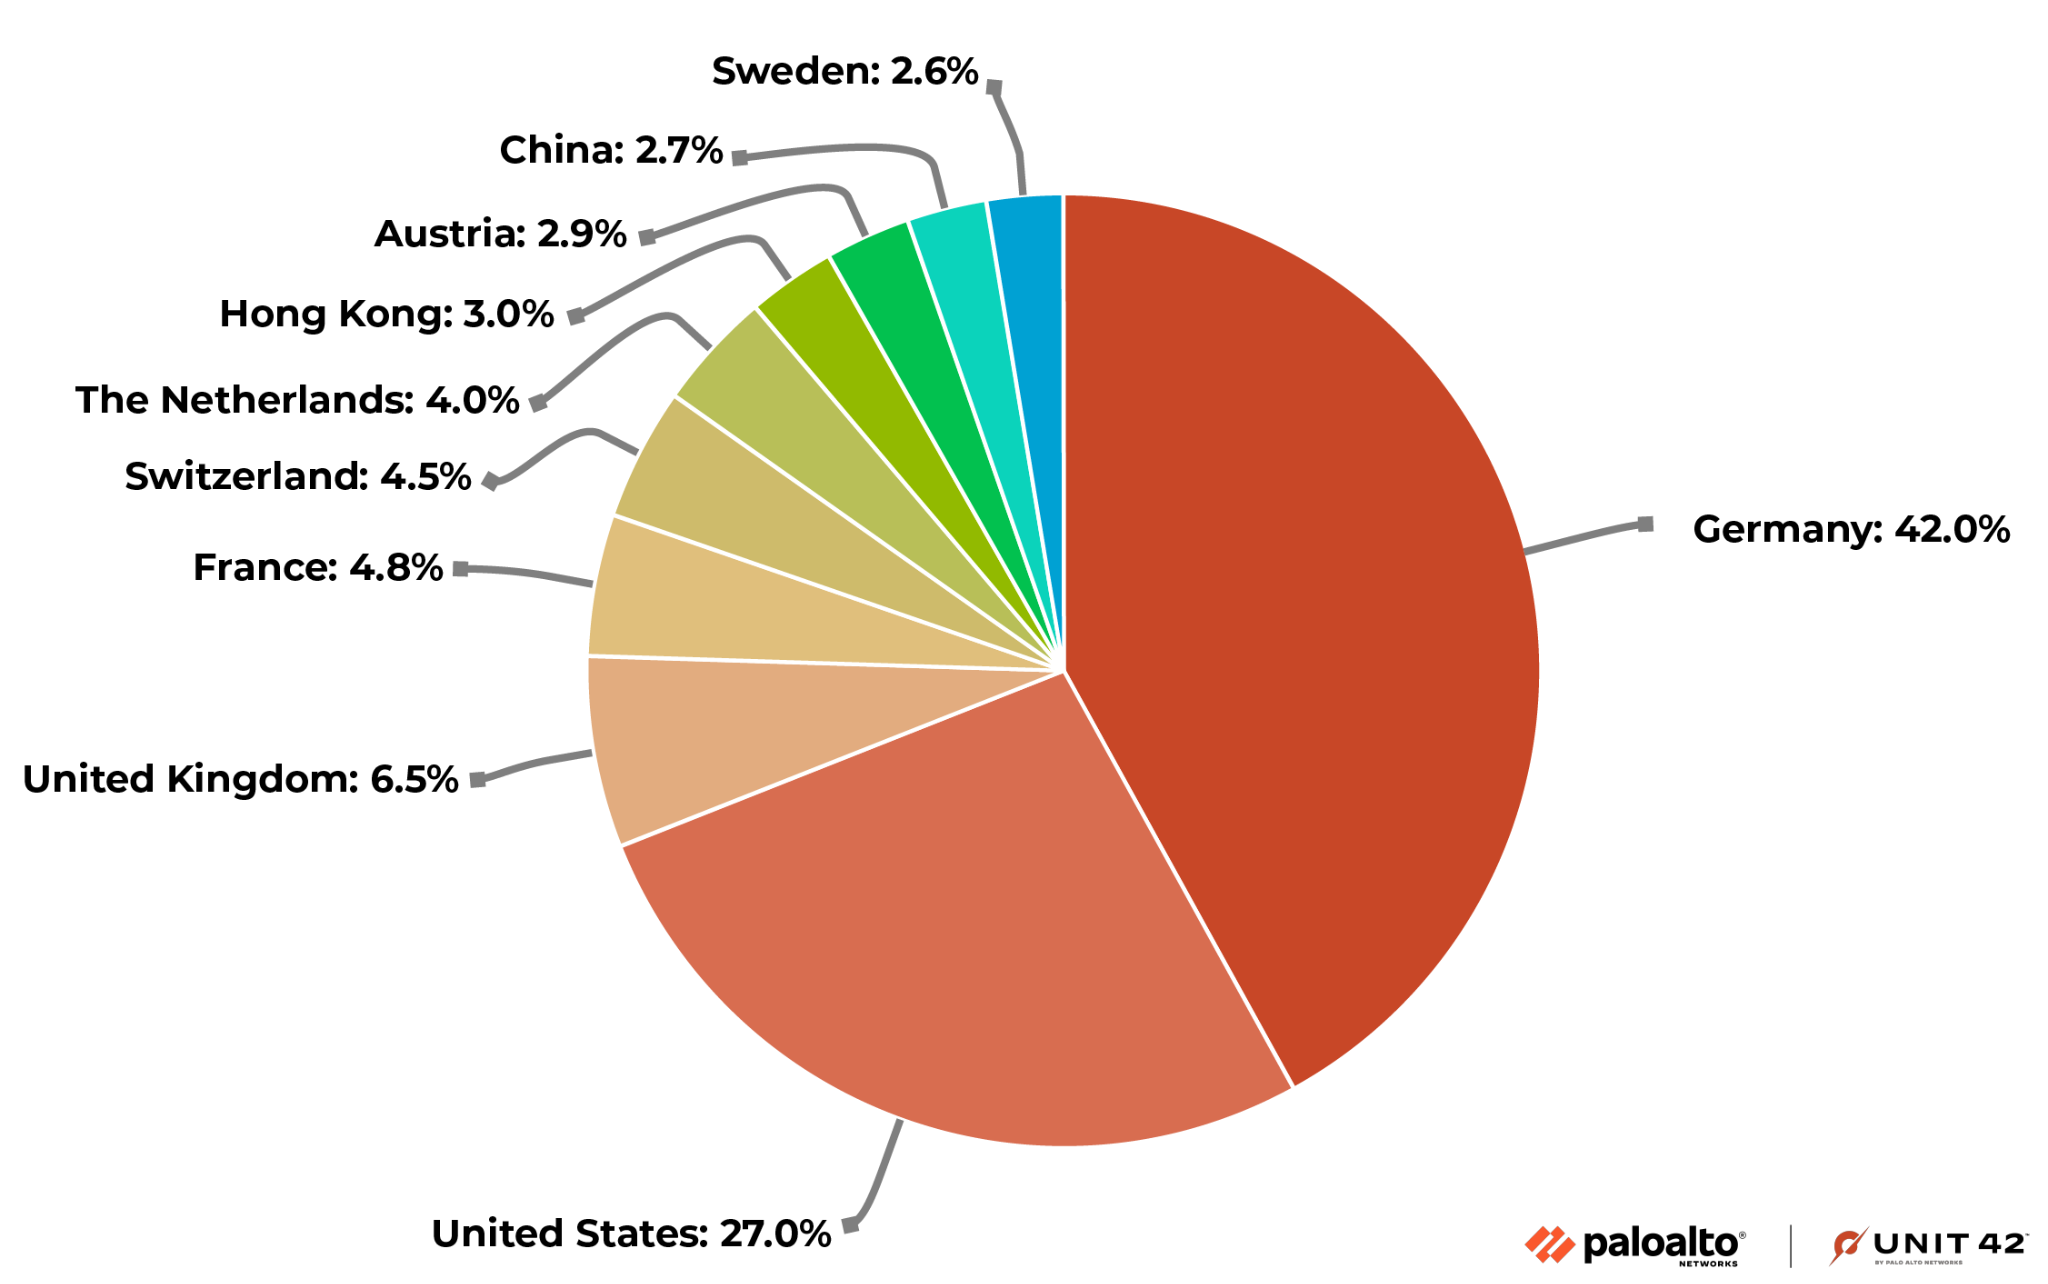 Image 2 is a chart showing the affected MobileIron Core servers affected, by country. The top country is Germany at 42 percent. Second is the United States at 27 percent, and third is the United Kingdom at 6.5 percent.